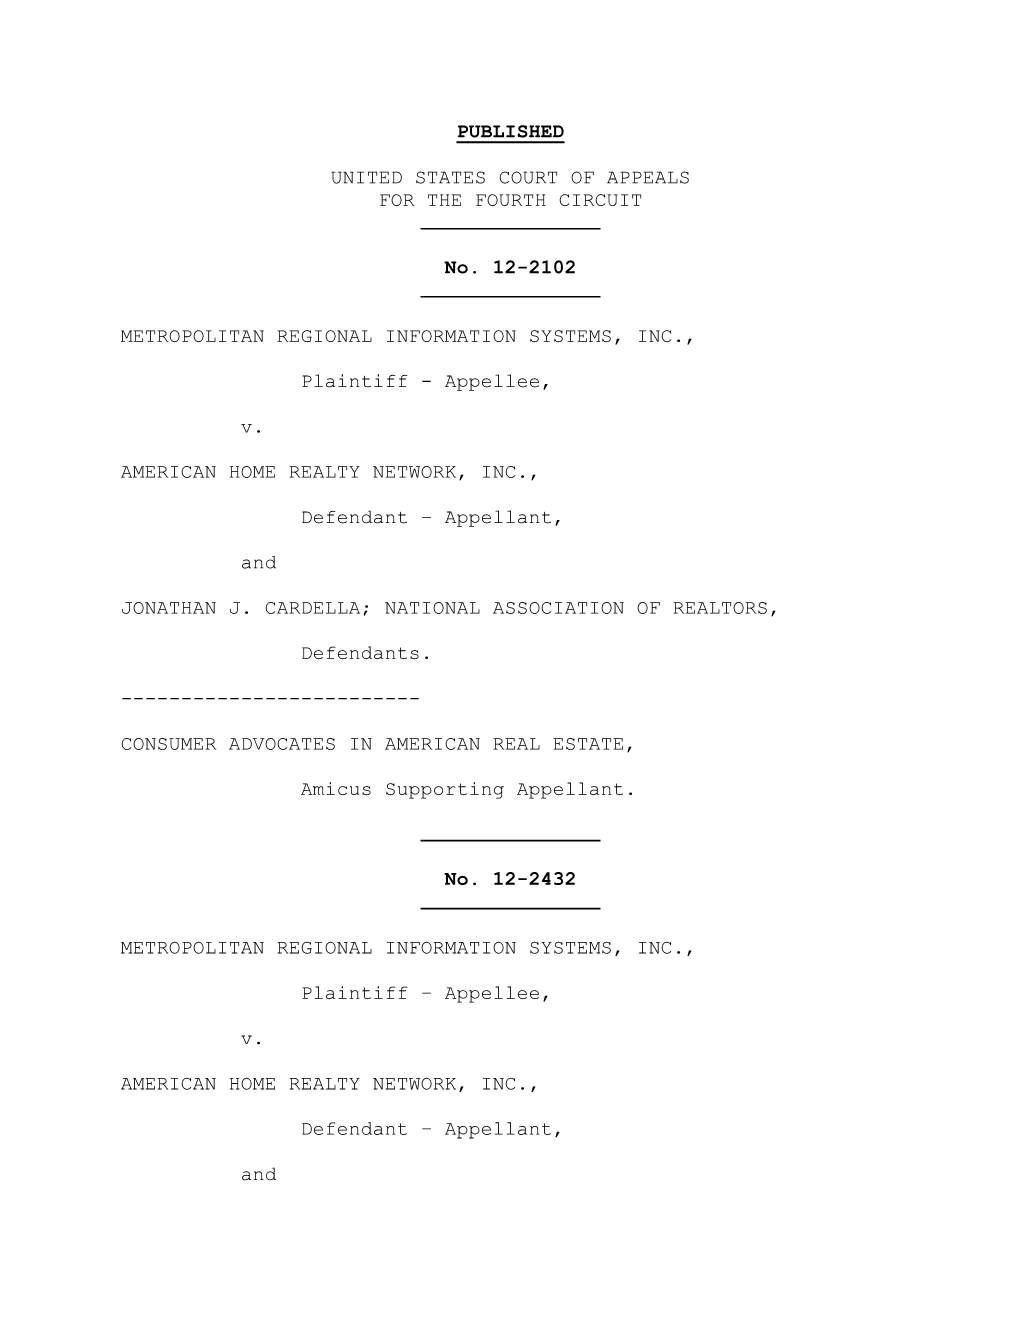 PUBLISHED UNITED STATES COURT of APPEALS for the FOURTH CIRCUIT No. 12-2102 METROPOLITAN REGIONAL INFORMATION SYSTEMS, INC